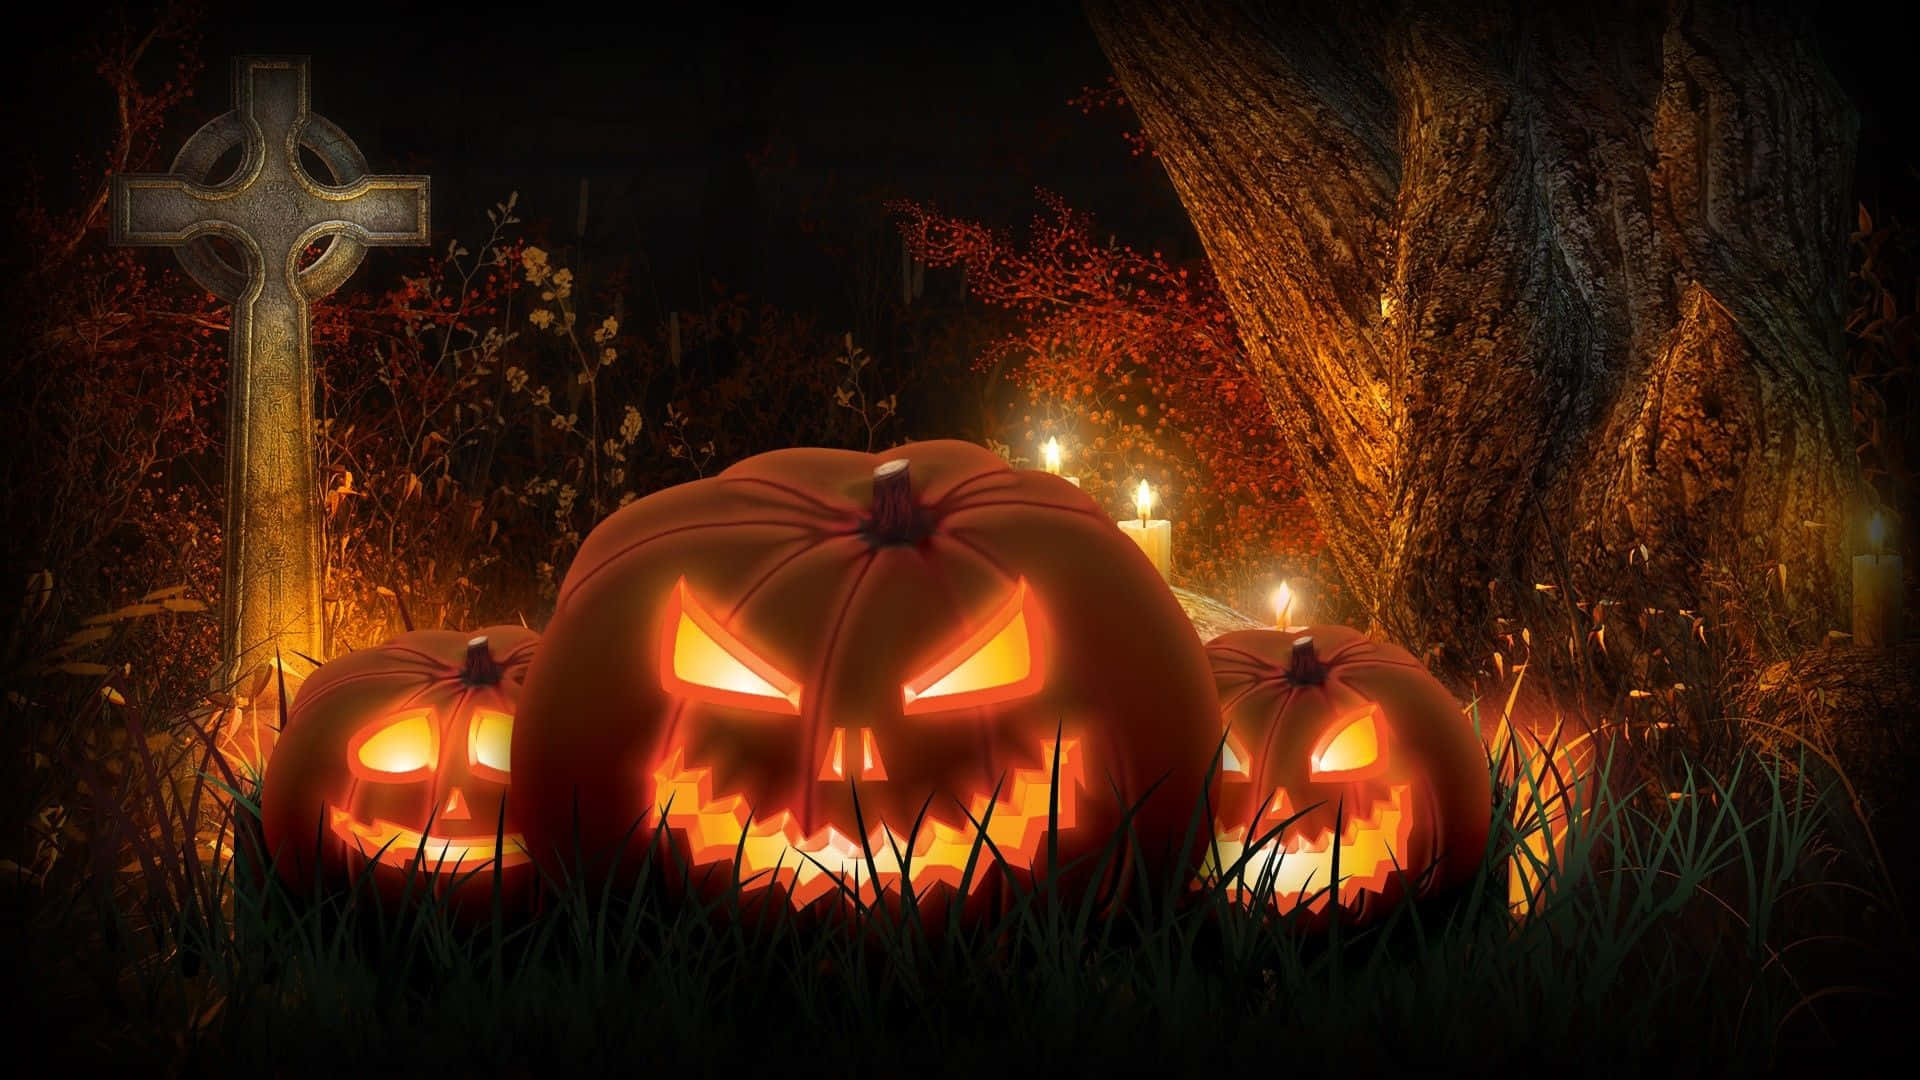 "Spook your guests this Halloween with this spooky desktop wallpaper!" Wallpaper